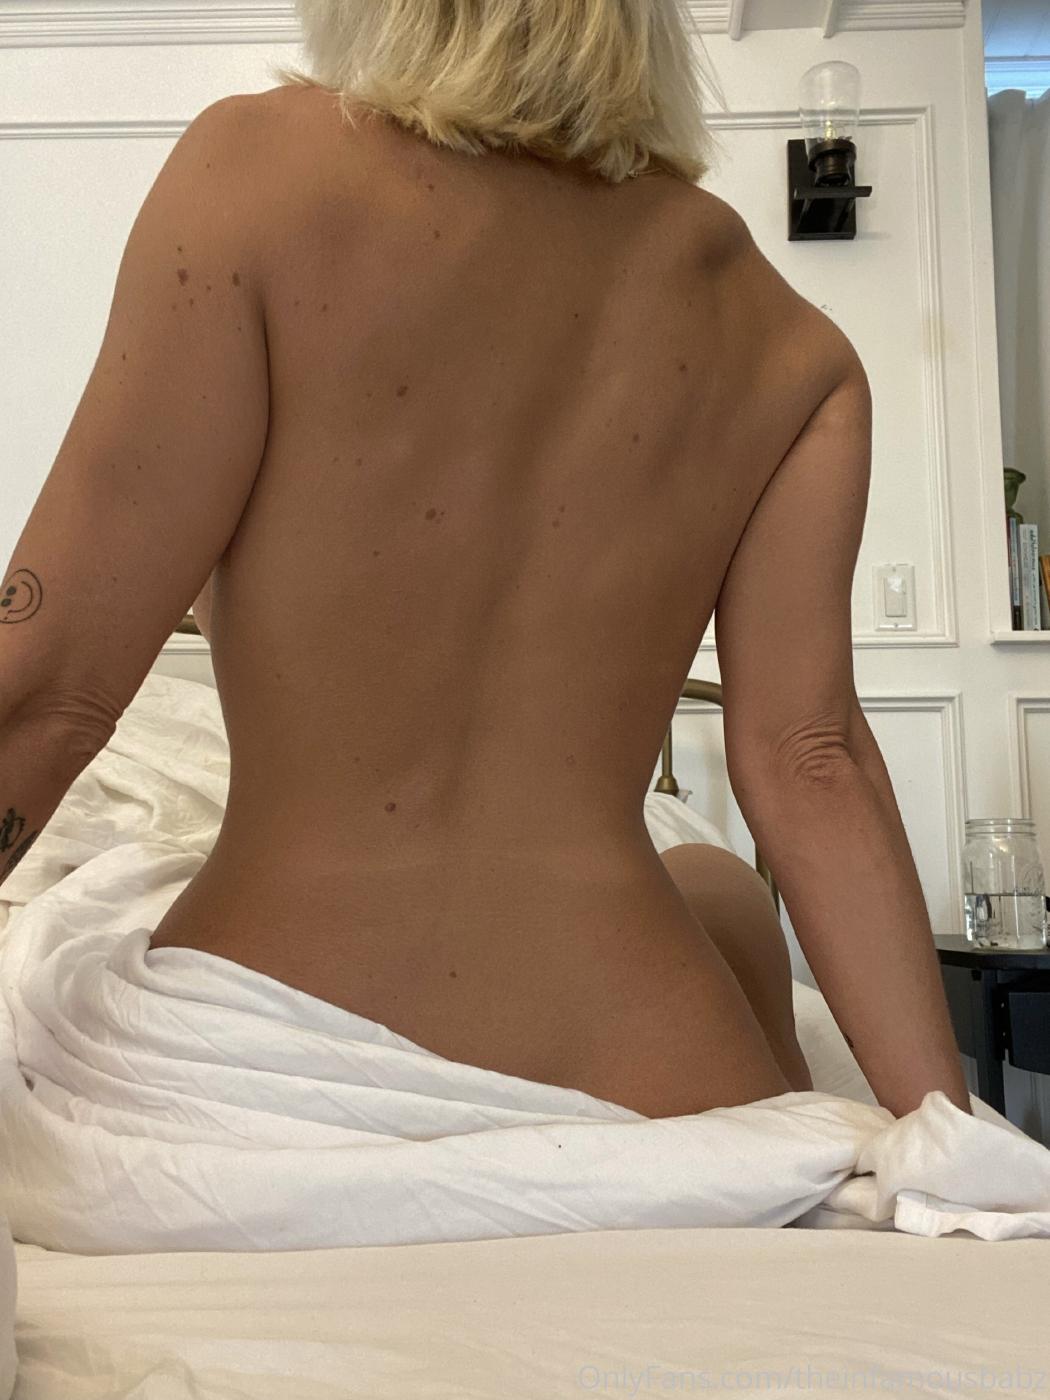 Gabbie Hanna Nude In Bed OF Leaked